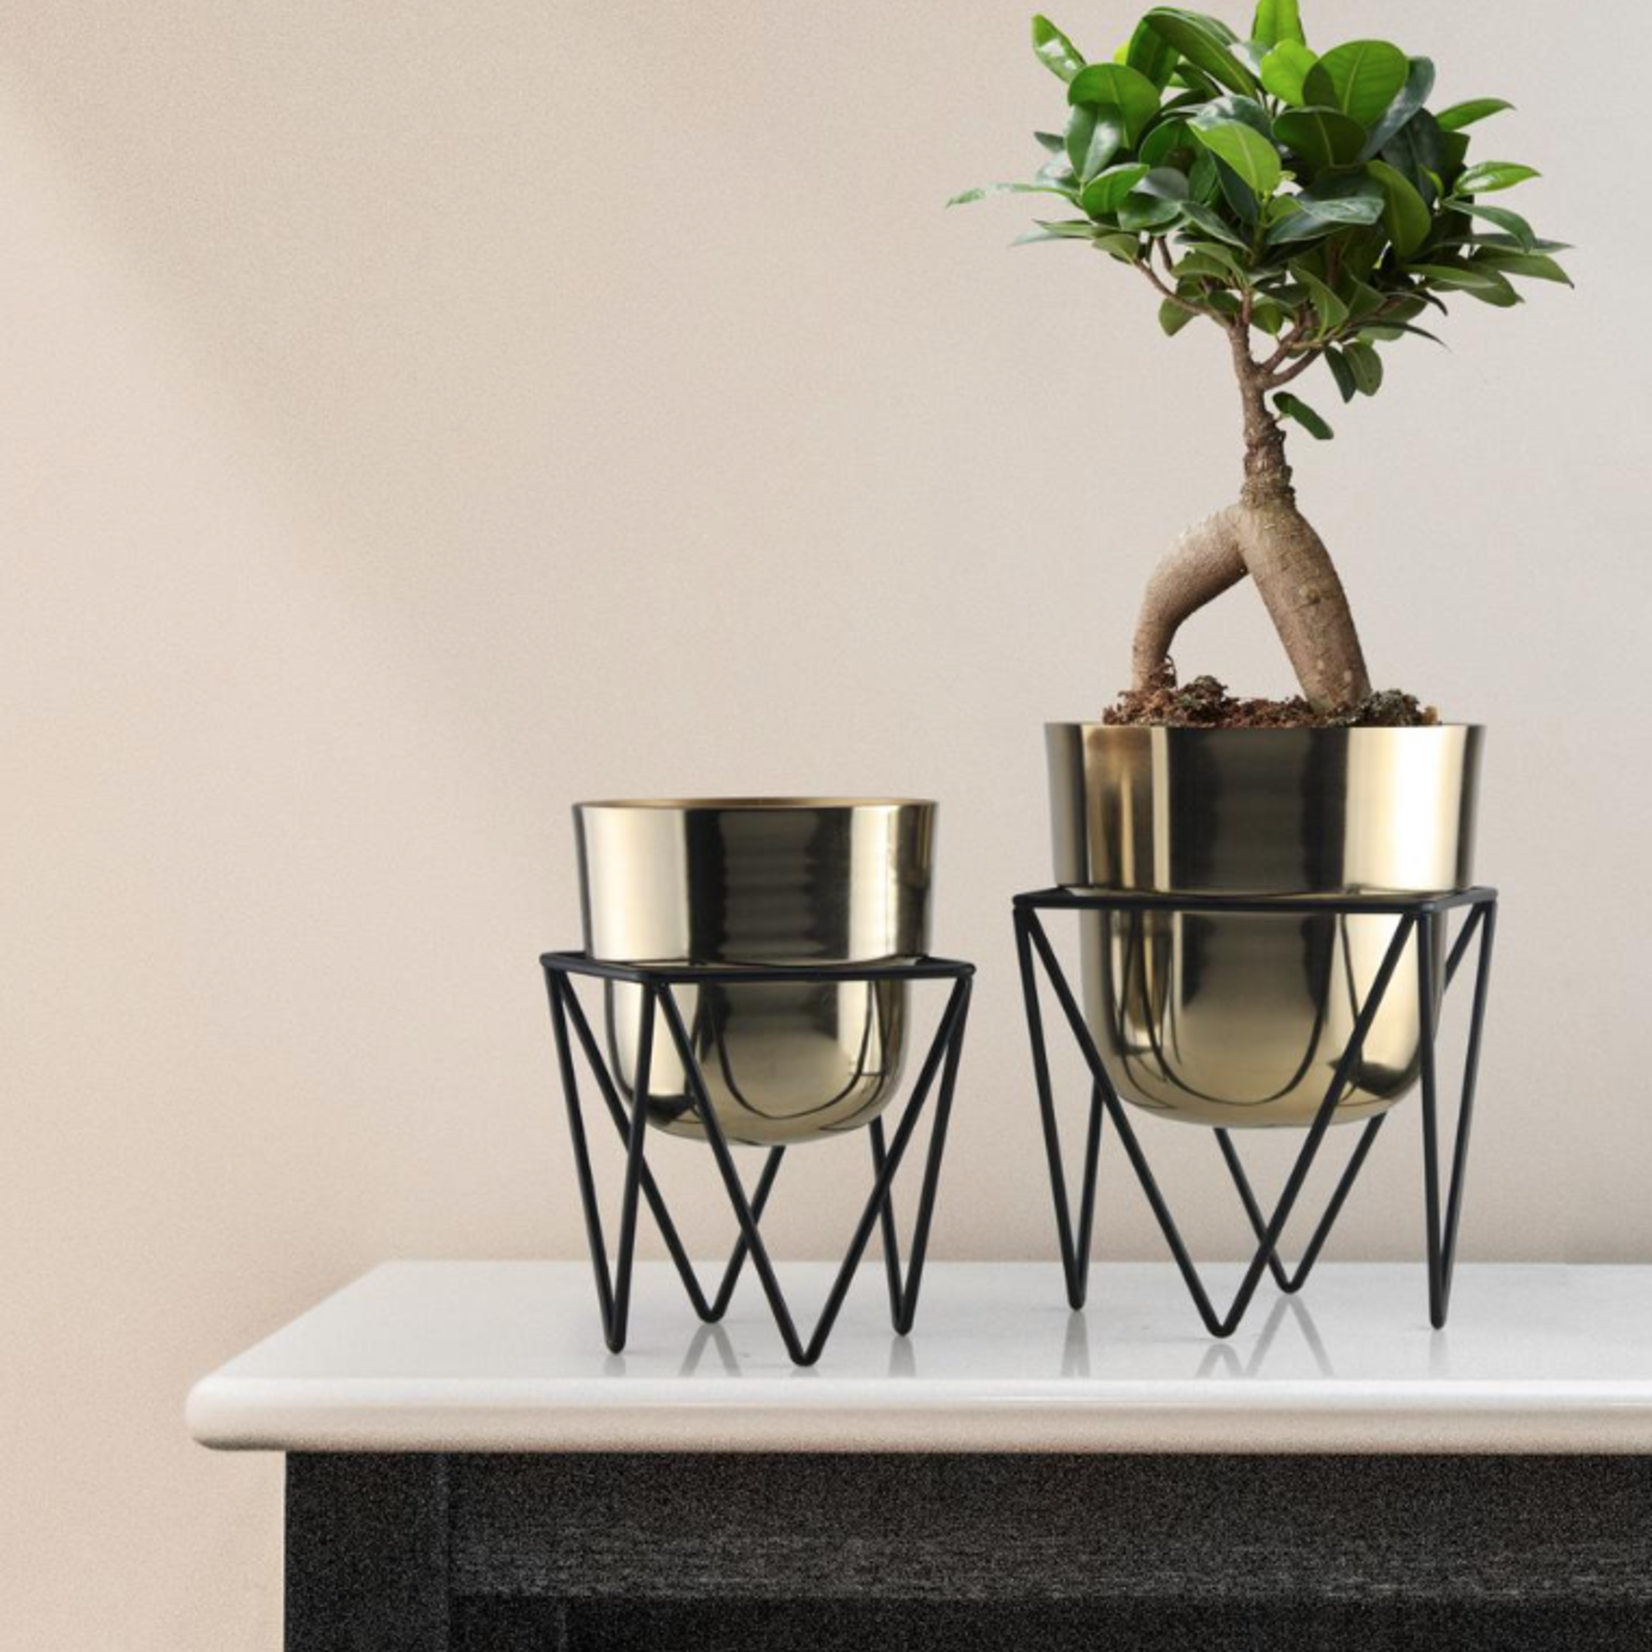 40% off was $75 now $45.   12.25” X 9”, POT 8.5”H X 9”, STAND 7.25”H X 8.75” GOLD METAL PLANTER W/ STAND 3-2076